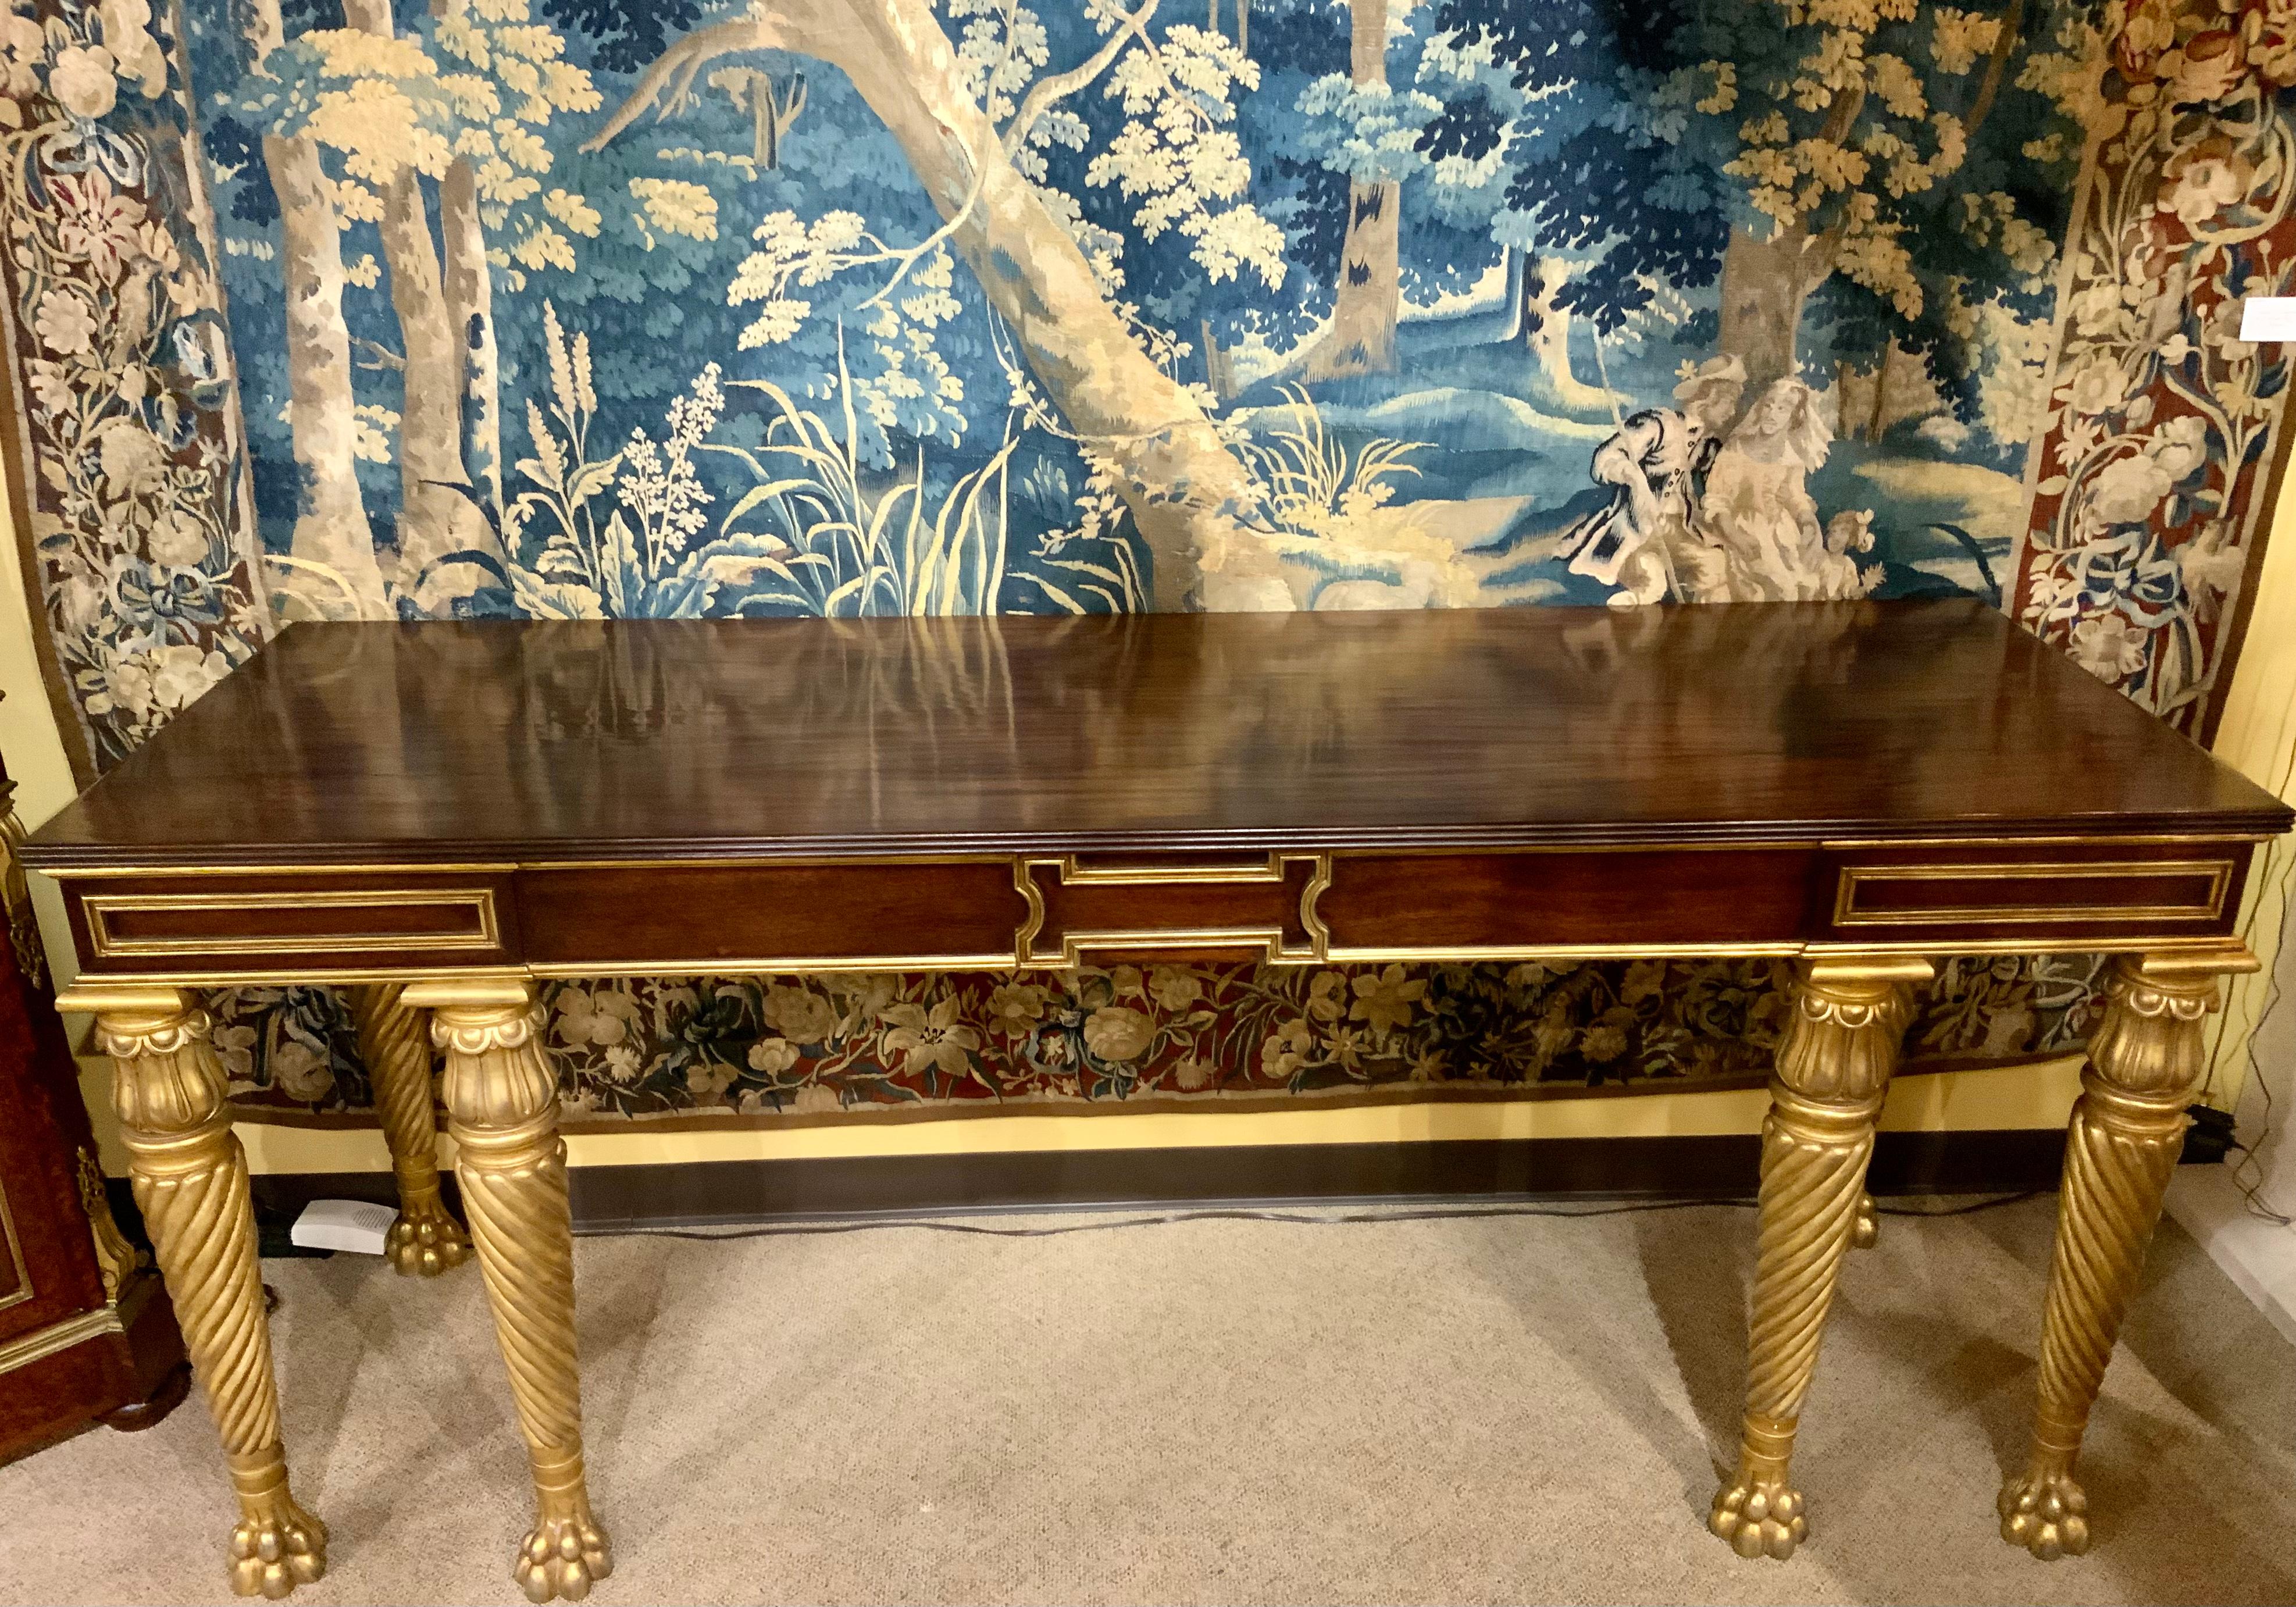 Mahogany Console with Gilt Carved Legs and Designs in Neoclassical Taste For Sale 3